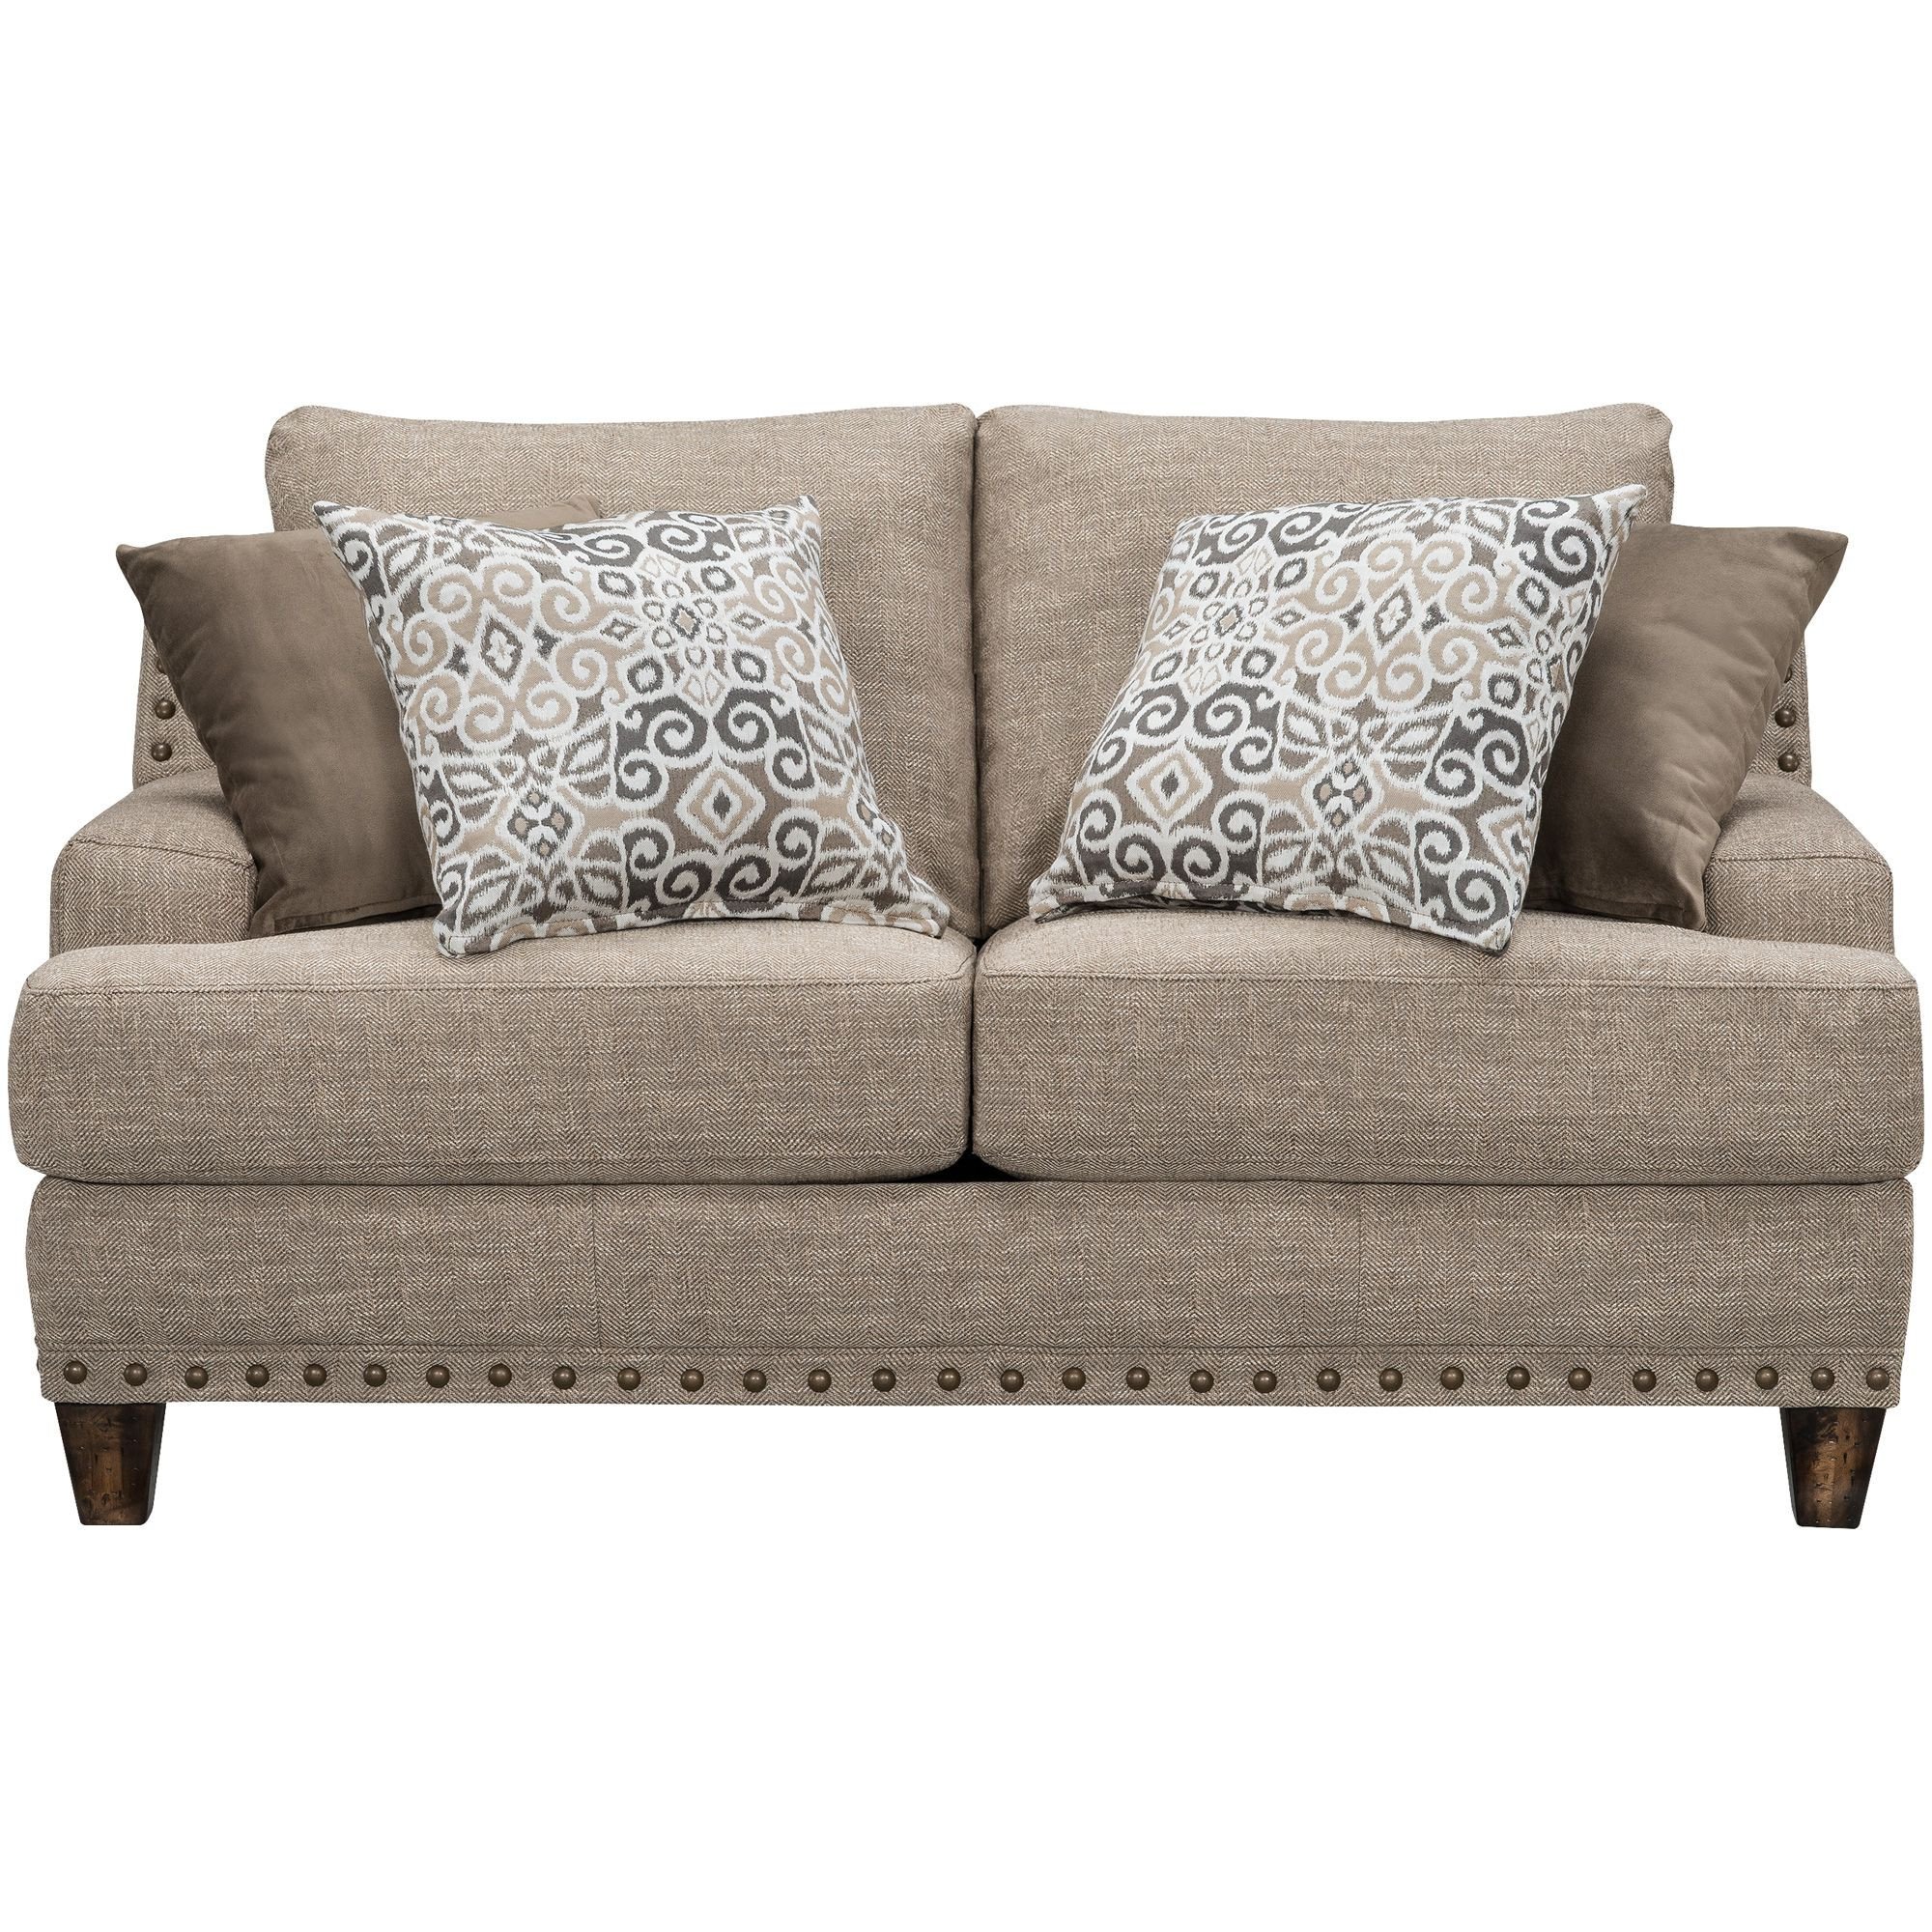 Small Loveseat for Bedroom Inspirational Marwood Driftwood Loveseat Products In 2019